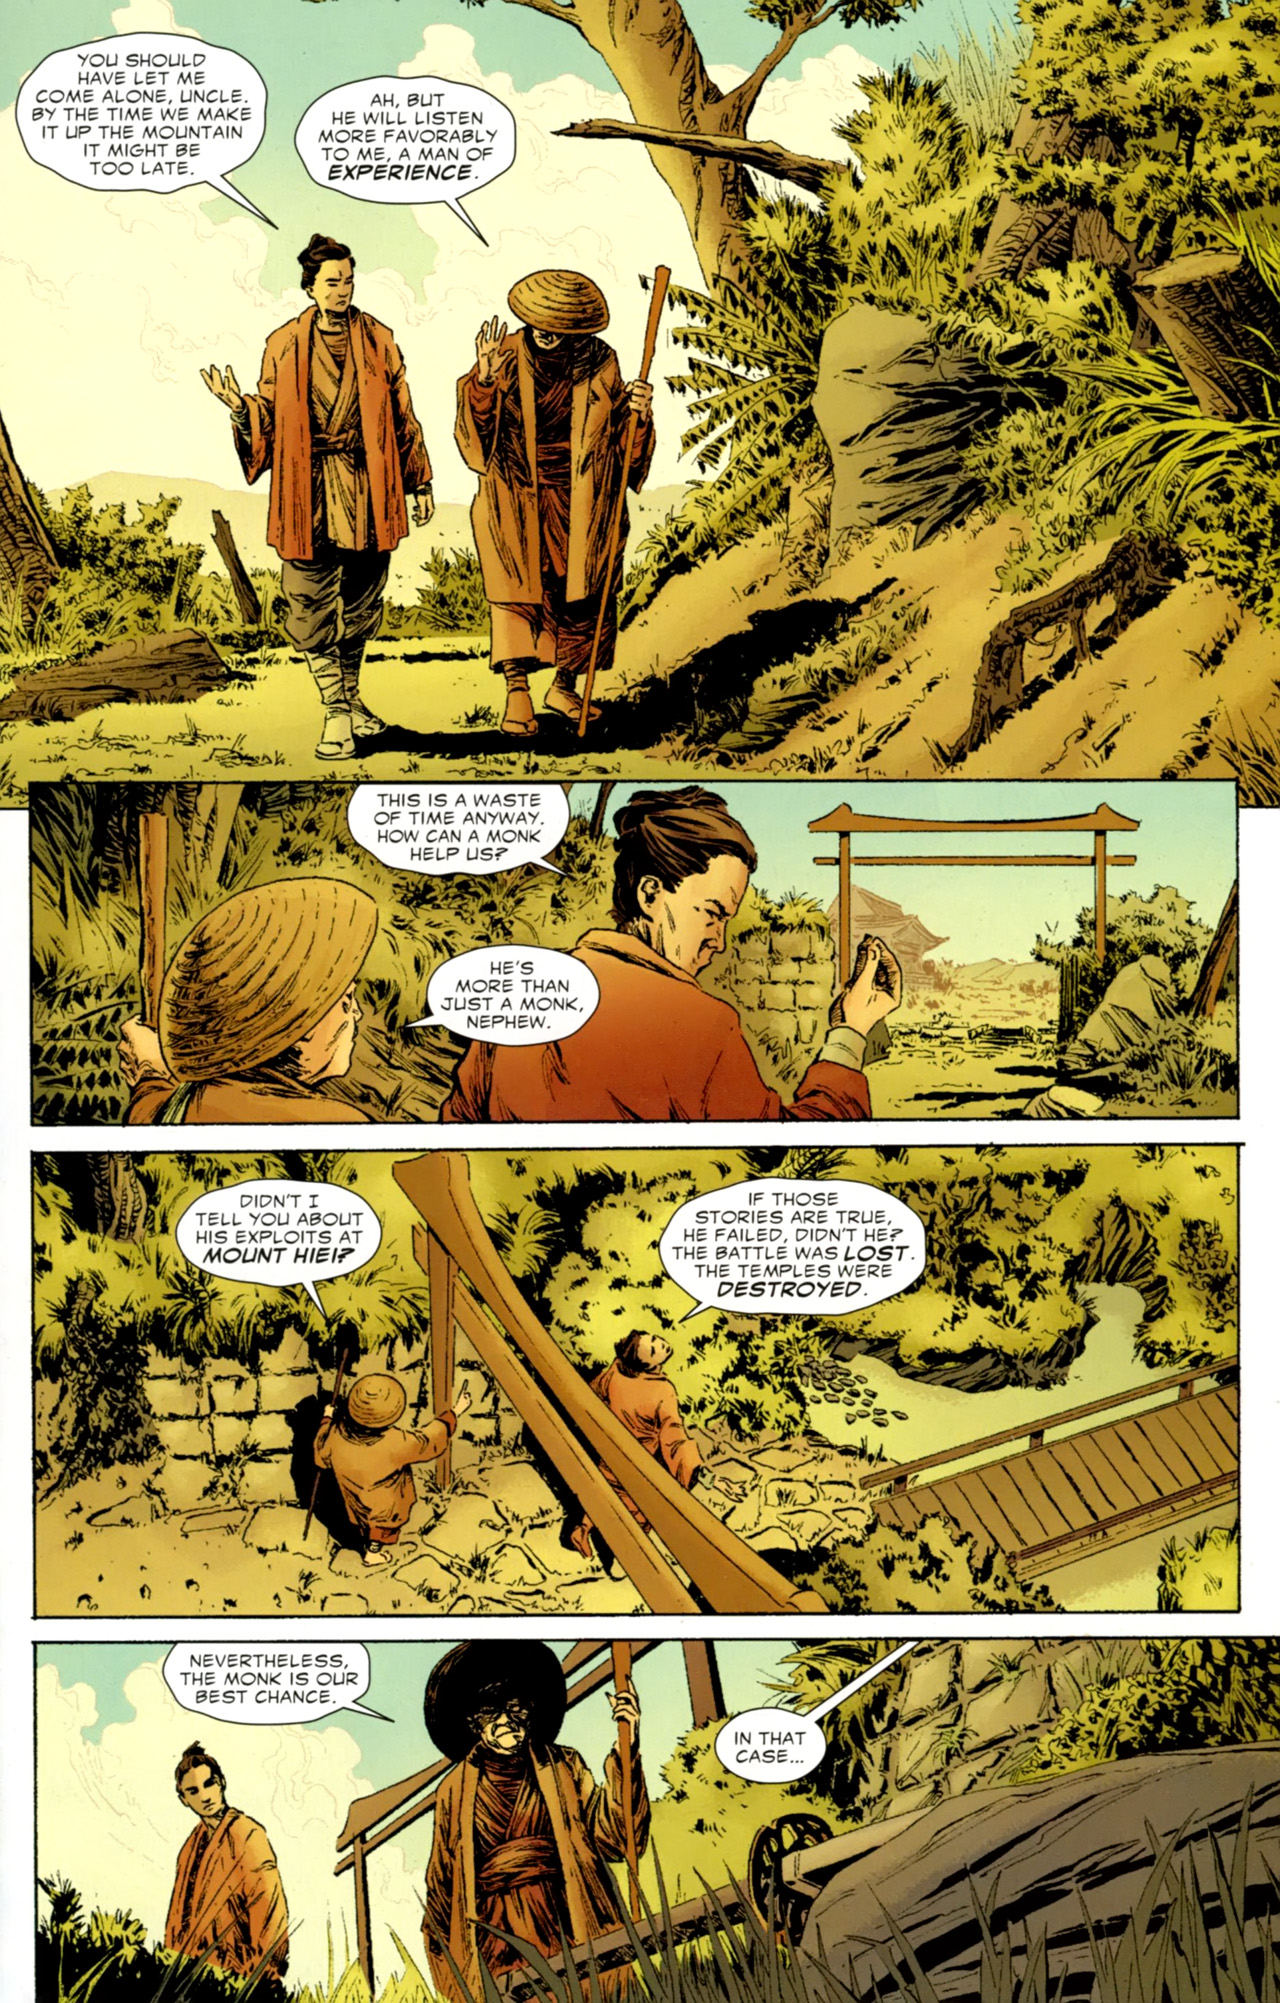 5 Ronin #2 - Chapter Two: The Way Of The Monk - Hulk